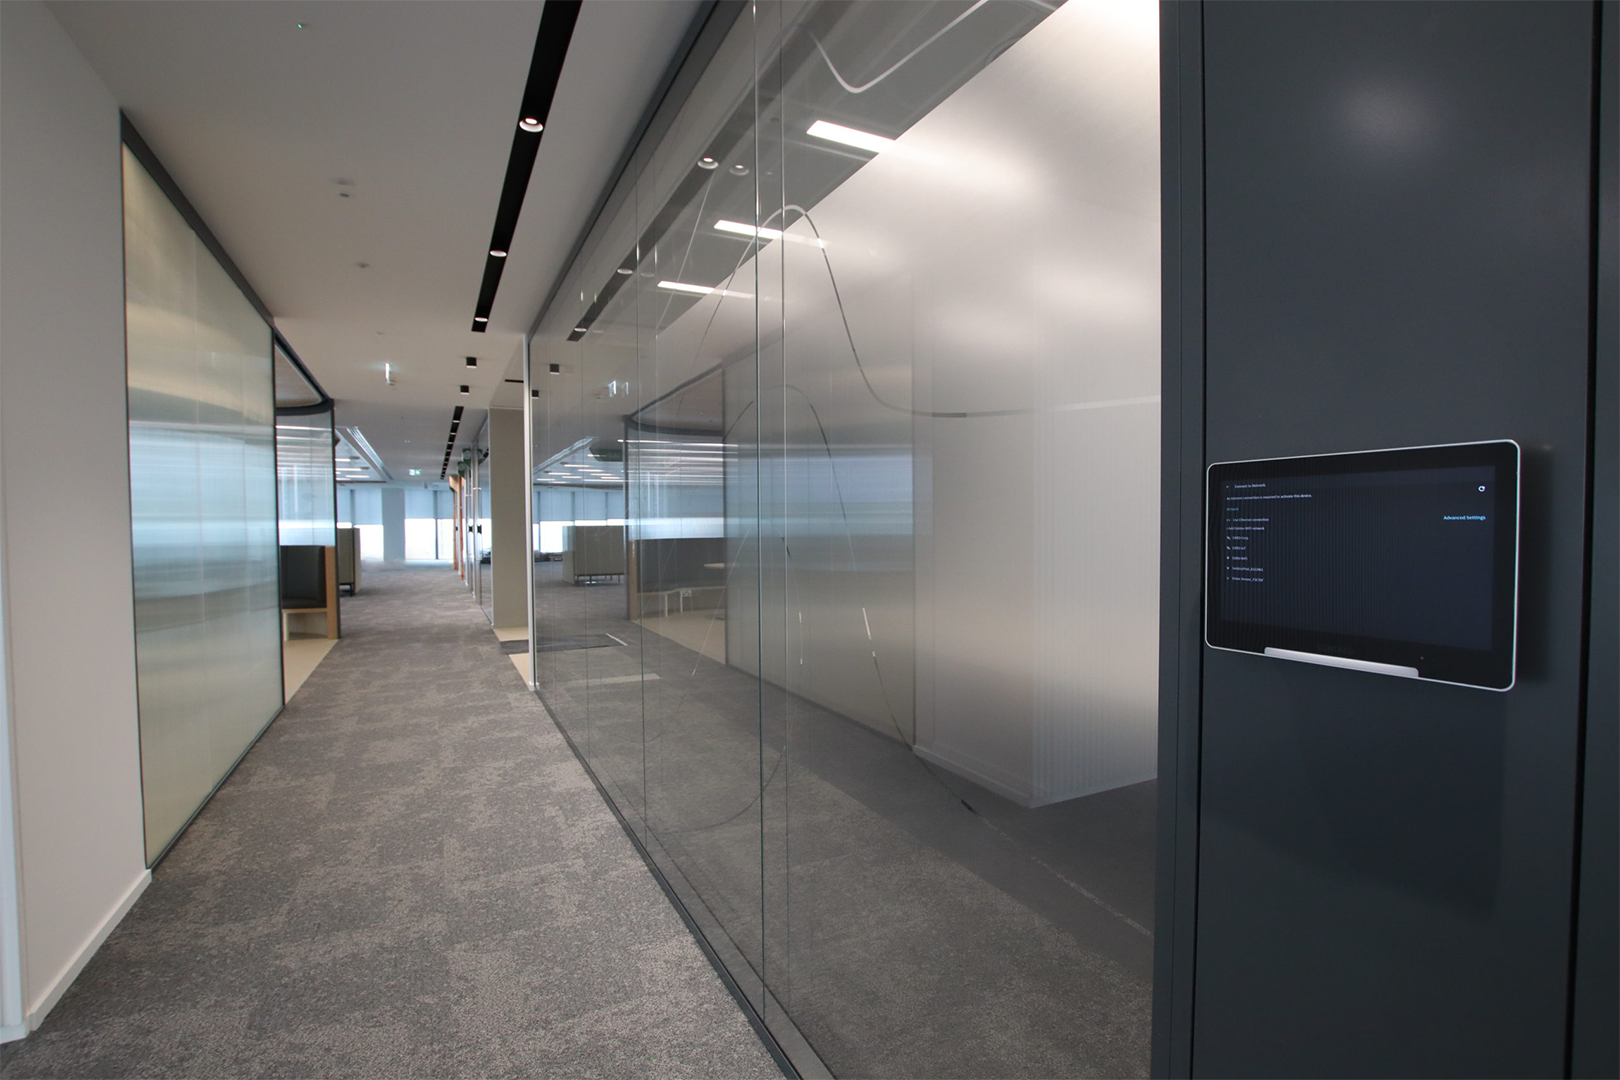 A wall replaced with glass office partitions